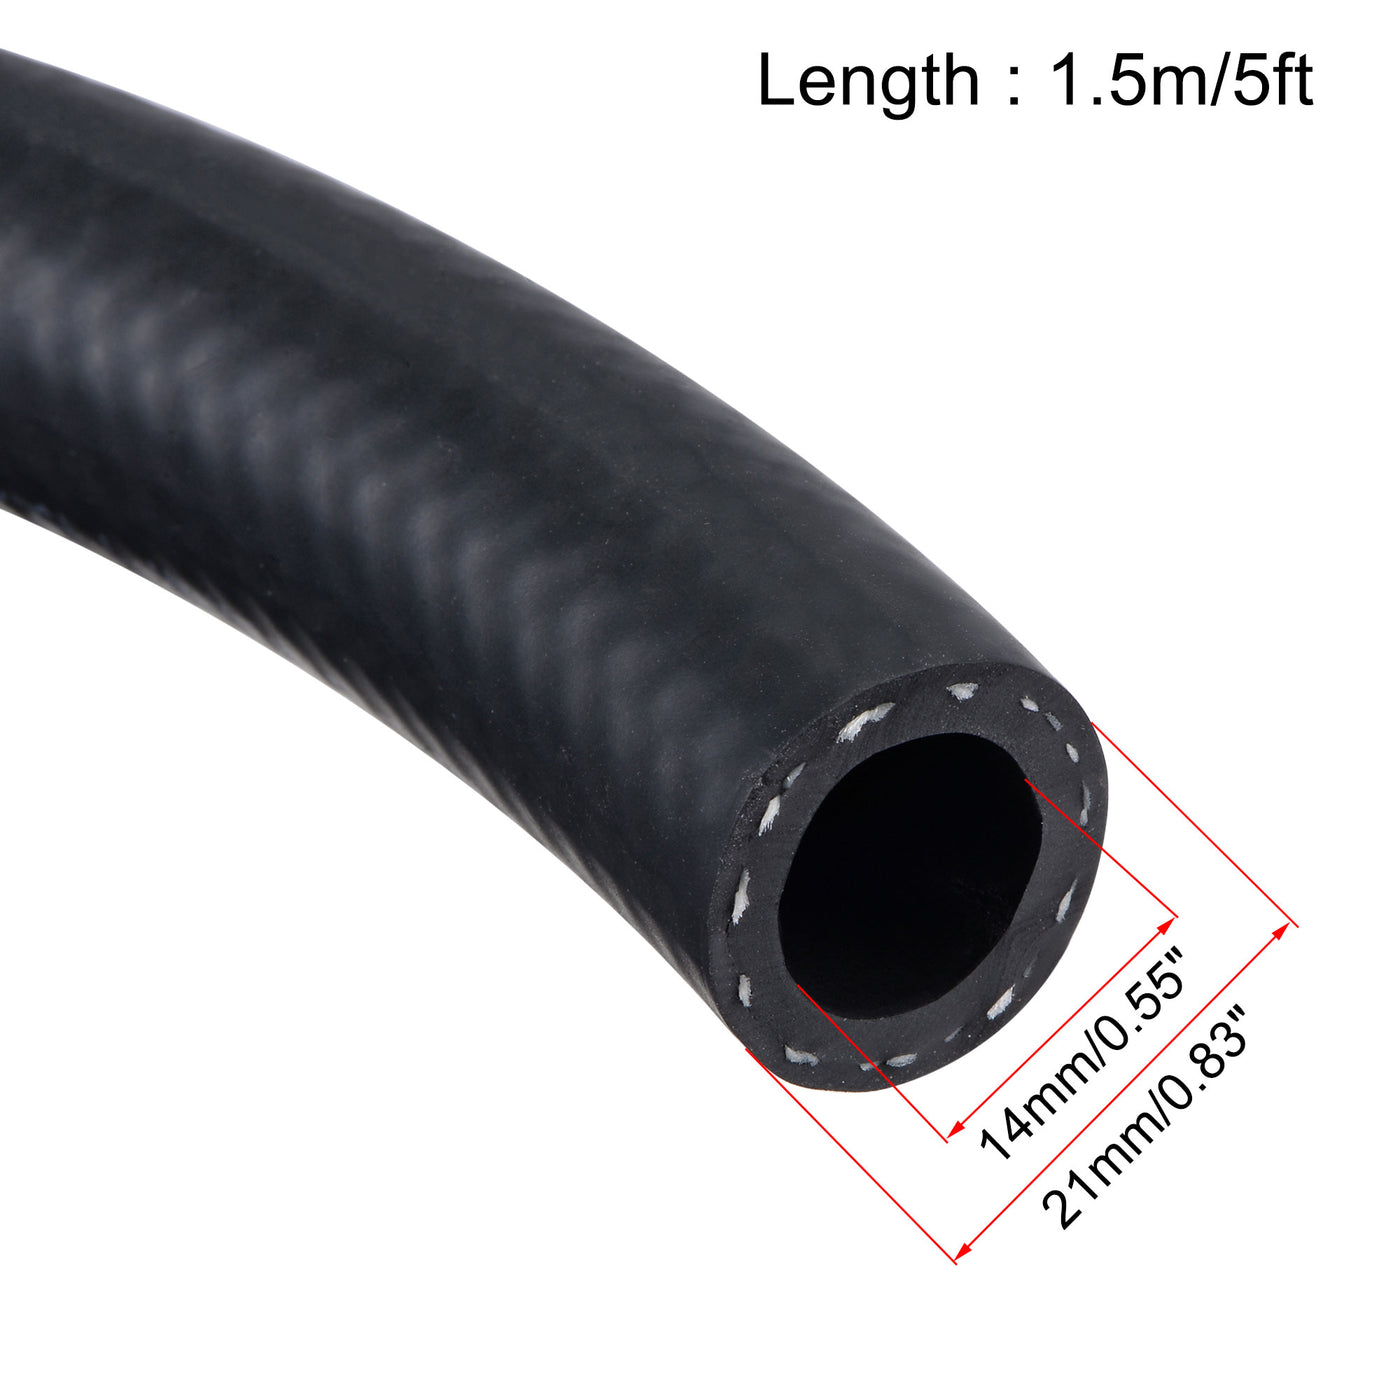 uxcell Uxcell 9/16" ID Fuel Line Hose, 13/16" OD 5ft Oil Tubing Black for Small Engines